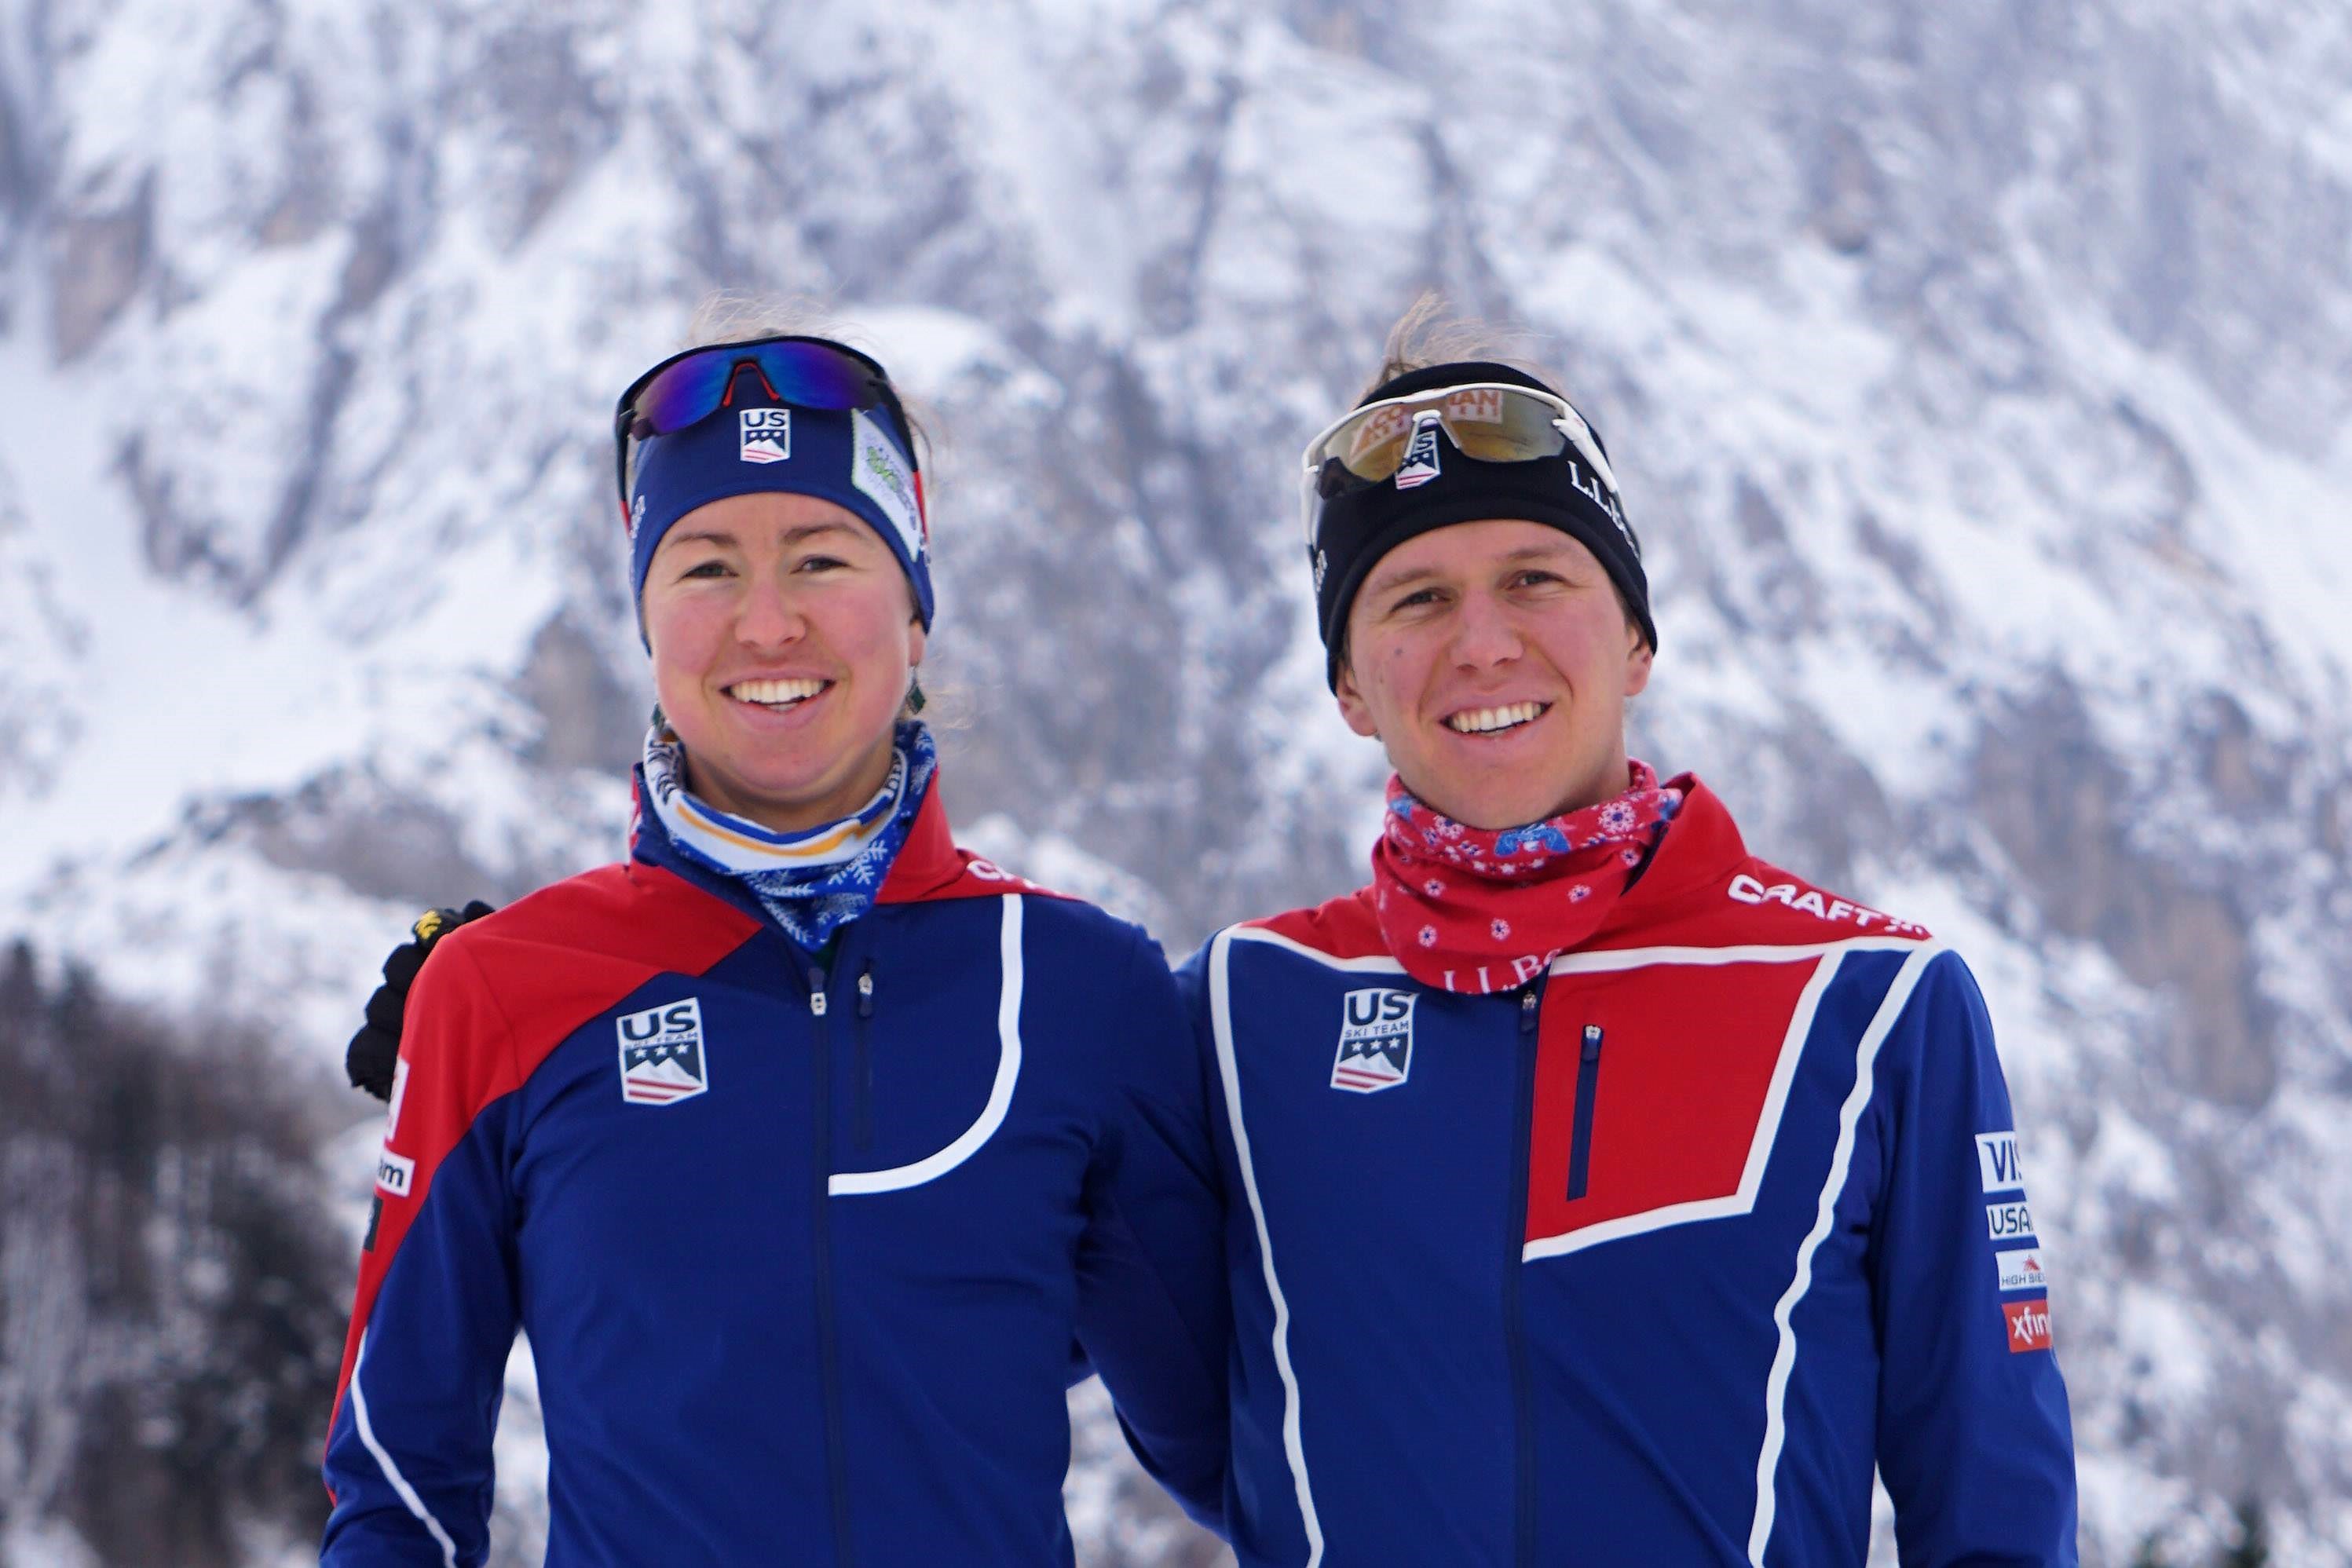 Caitlin and Scott Patterson were among the ten Alaskan athletes named to the U.S. Olympic cross-country ski team. (Photo courtesy Caitlin Patterson)